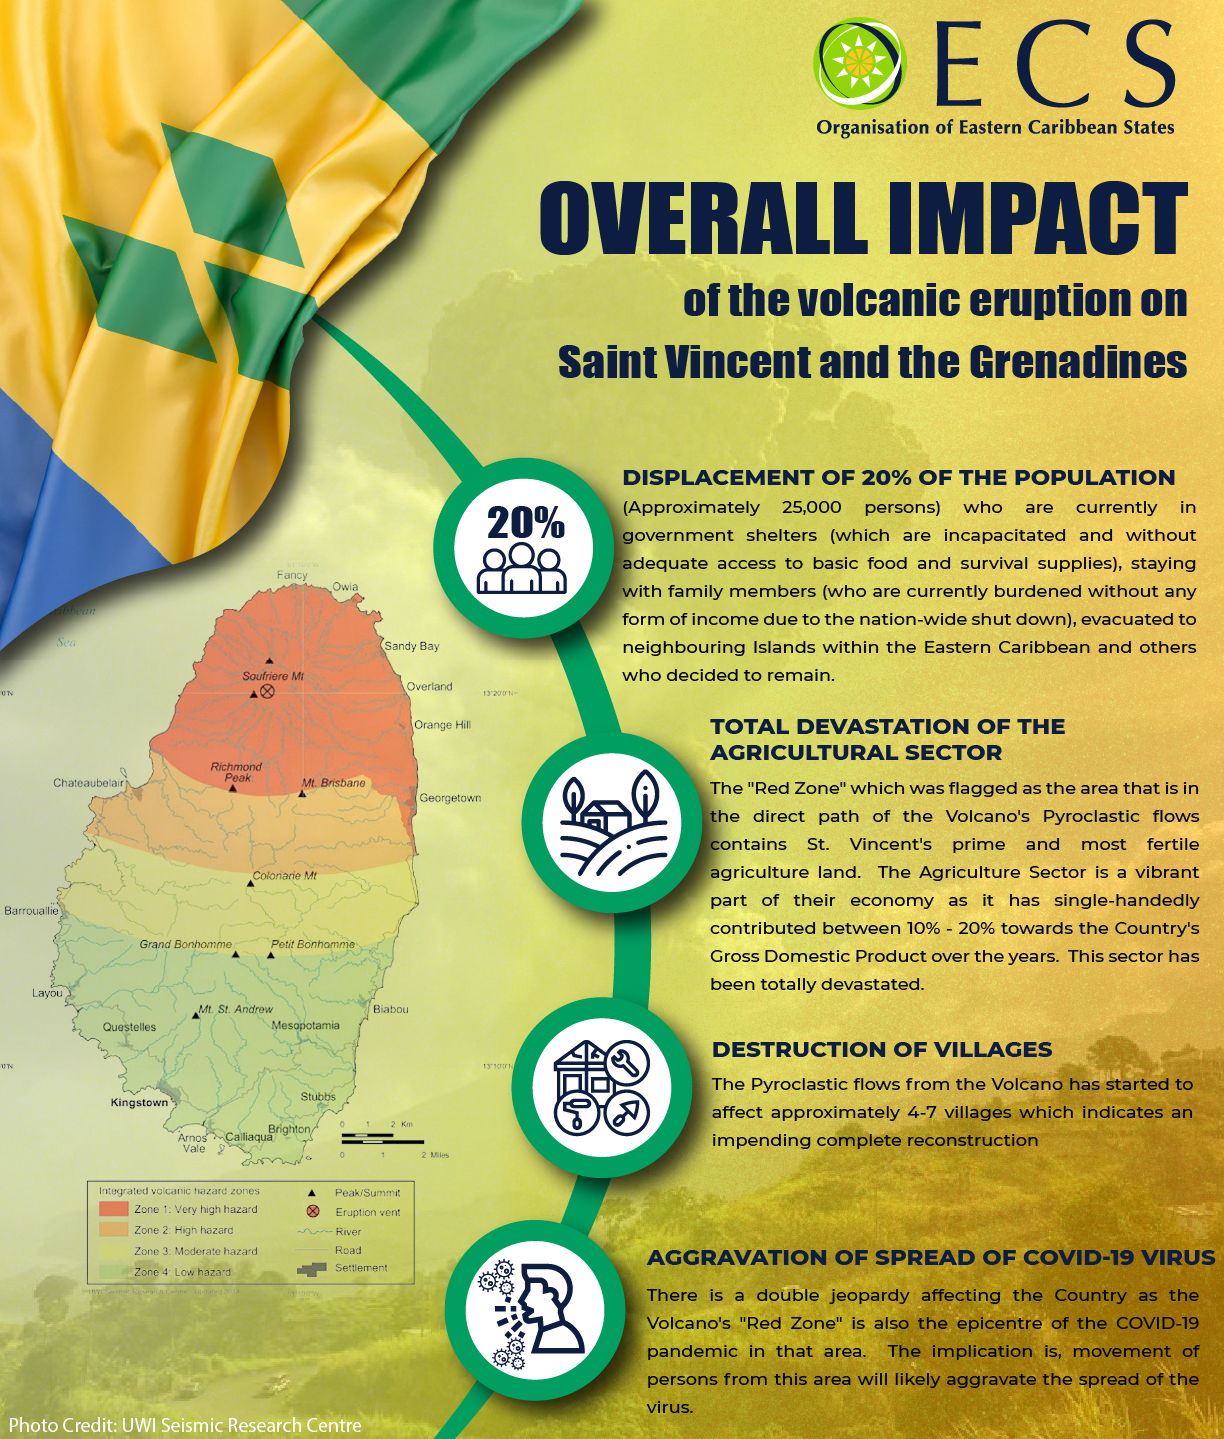 Caribbean News Global SVG-OveralImpact1 OECS Commission launches “Stronger Together Campaign” to support St Vincent and the Grenadines  